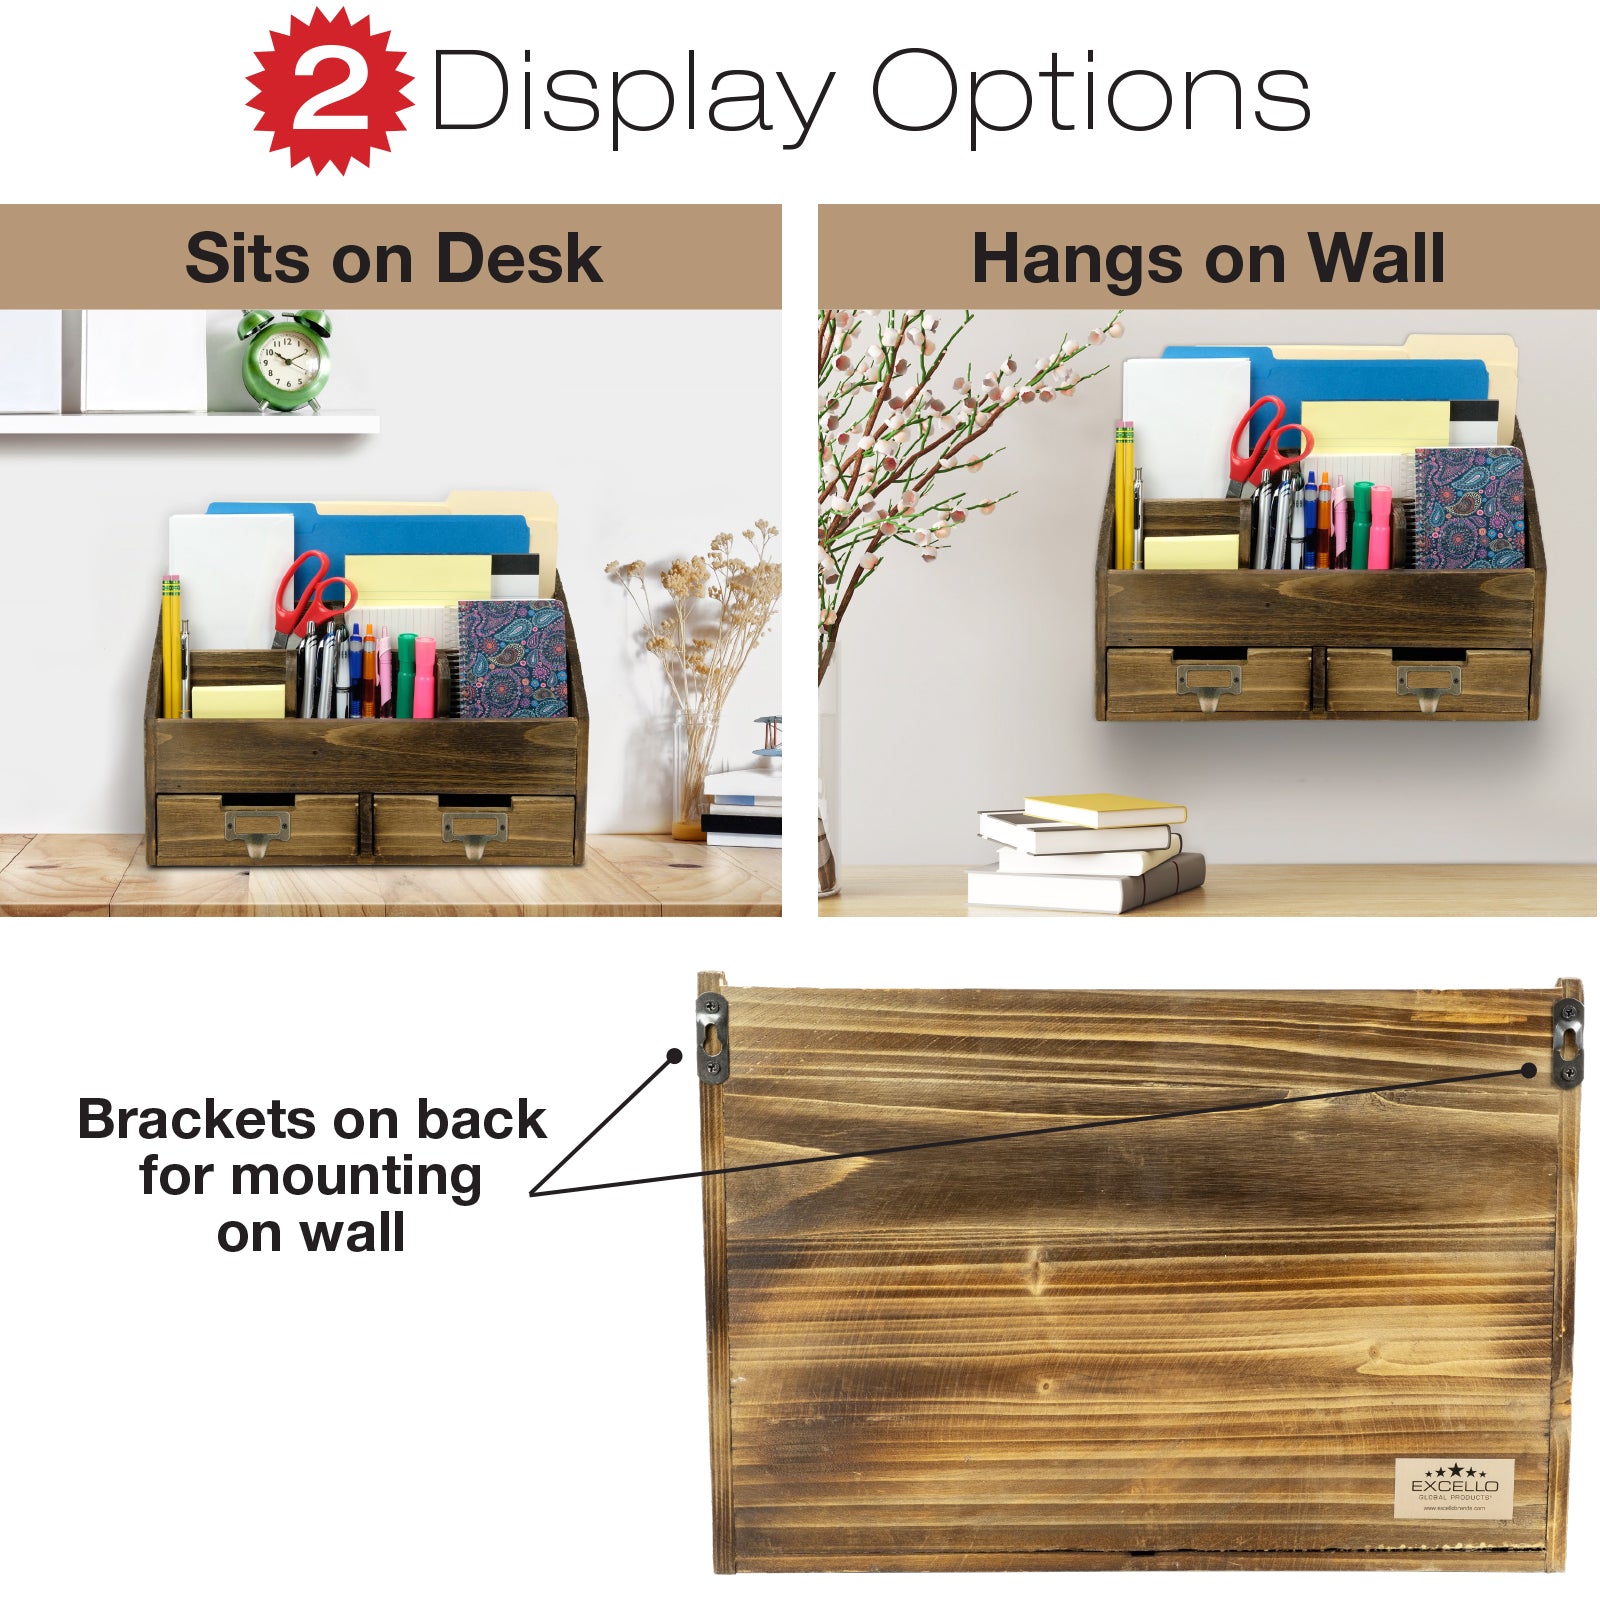 Rustic Wood Office Desk Organizer: Includes 6 Compartments ...